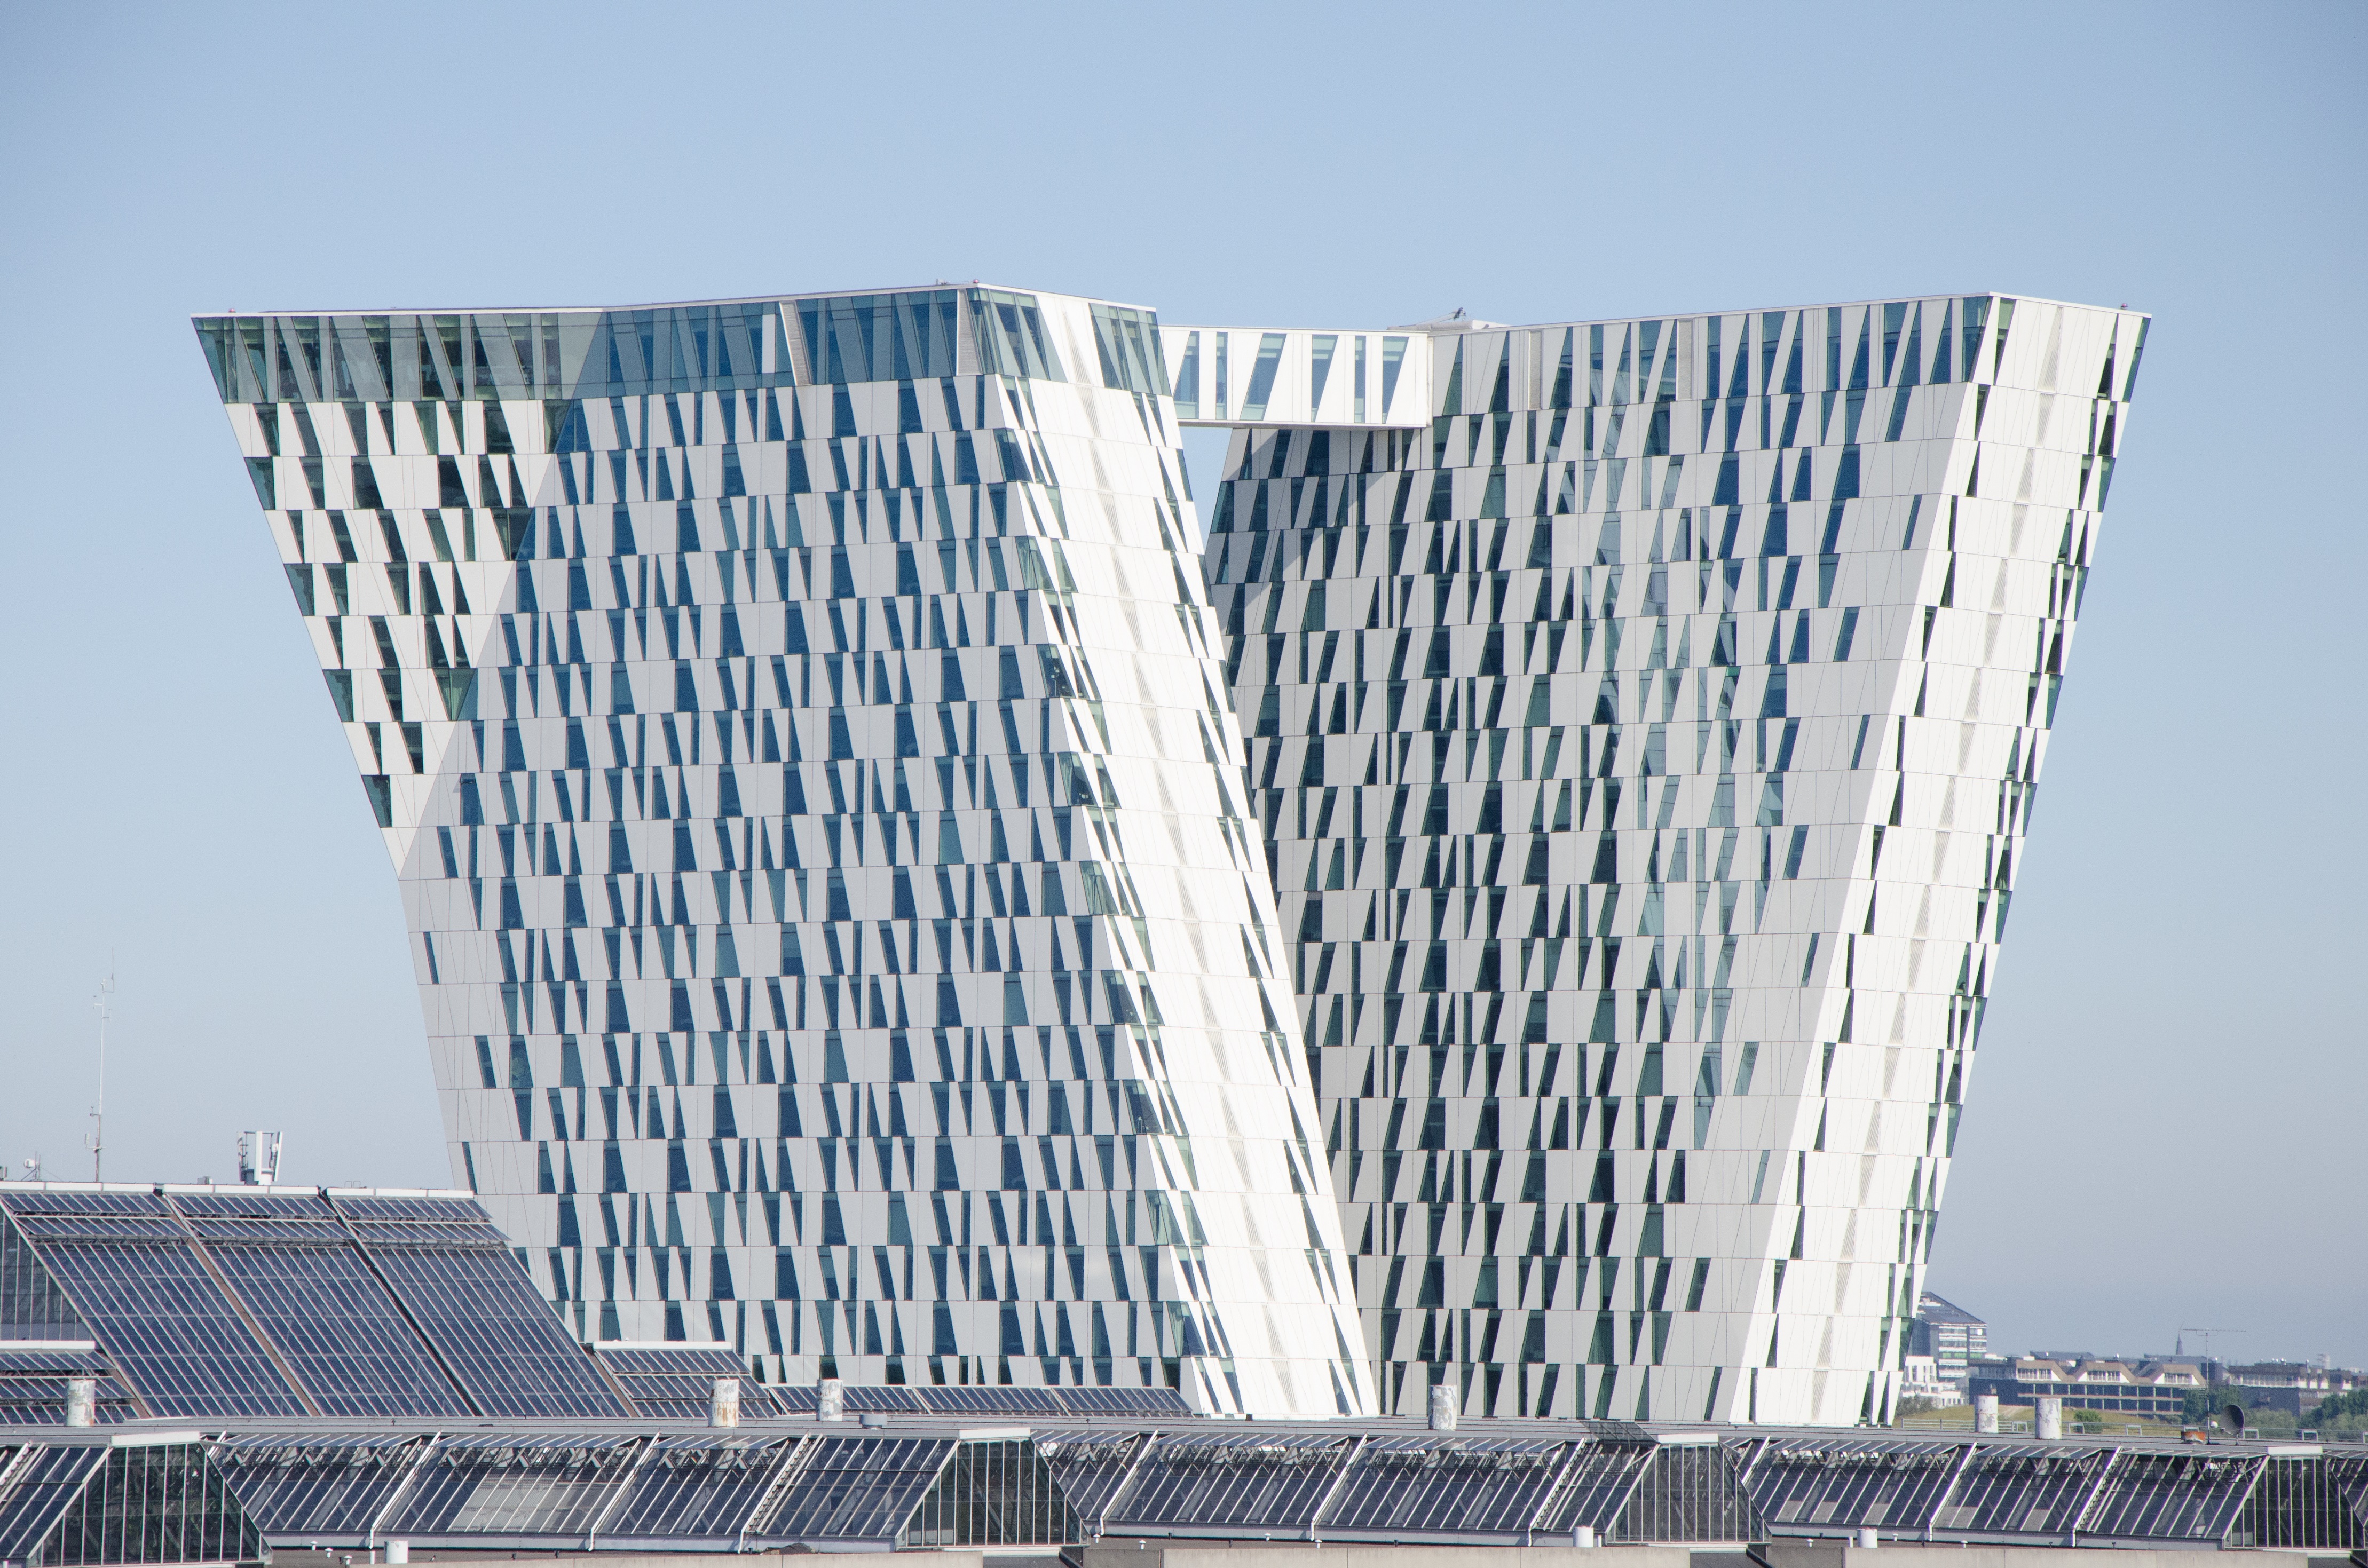 A powerful expressive work with two inclined and faceted towers connected by a sky bridge. The buildings are trapez shaped and made with white plates and glass.